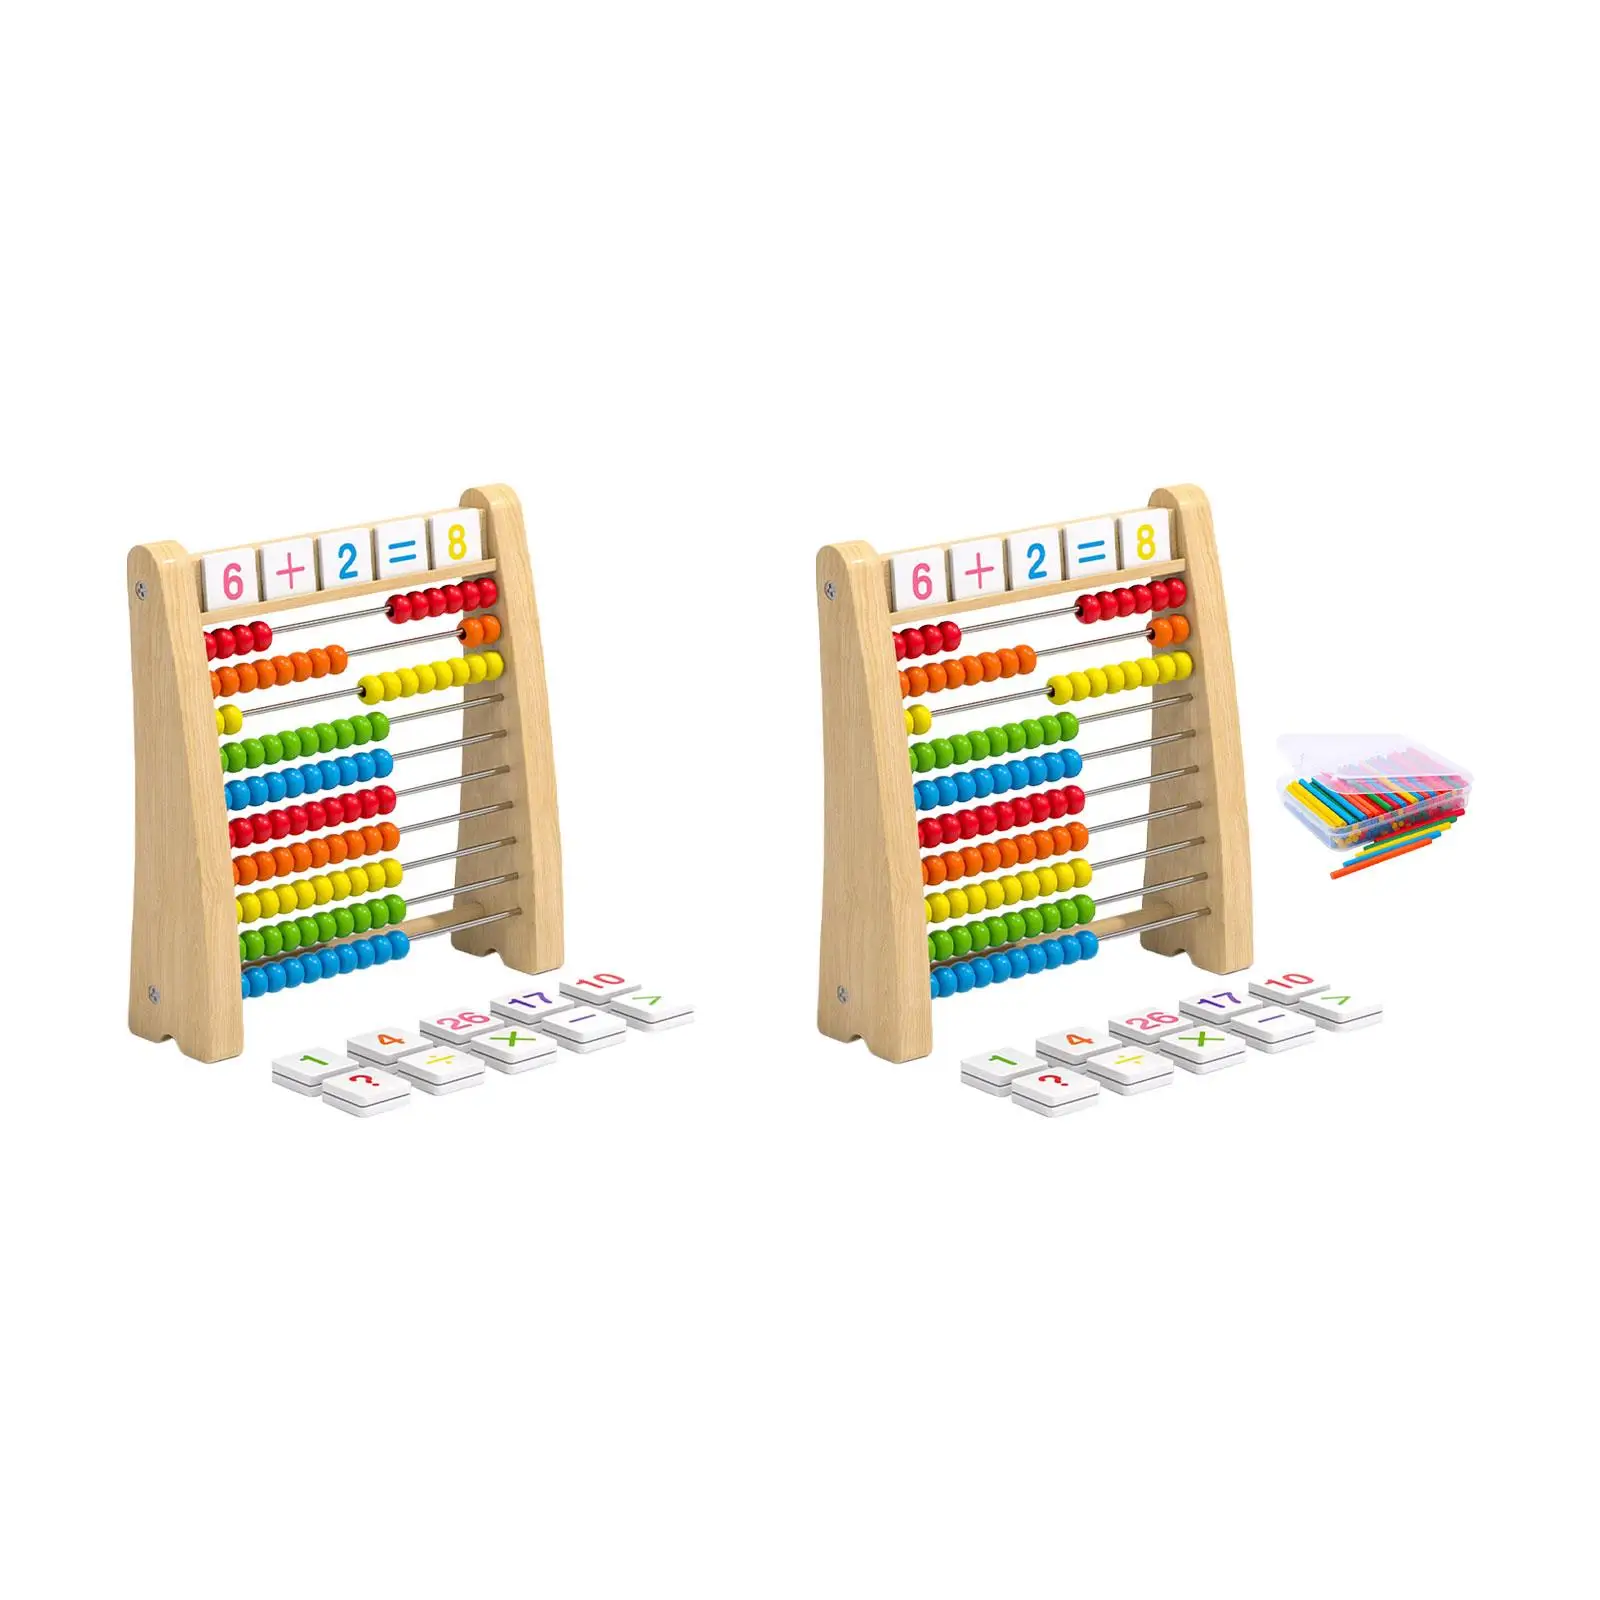 Wooden Abacus Educational Counting Toy Ten Frame Set Math Manipulatives for Kindergarten